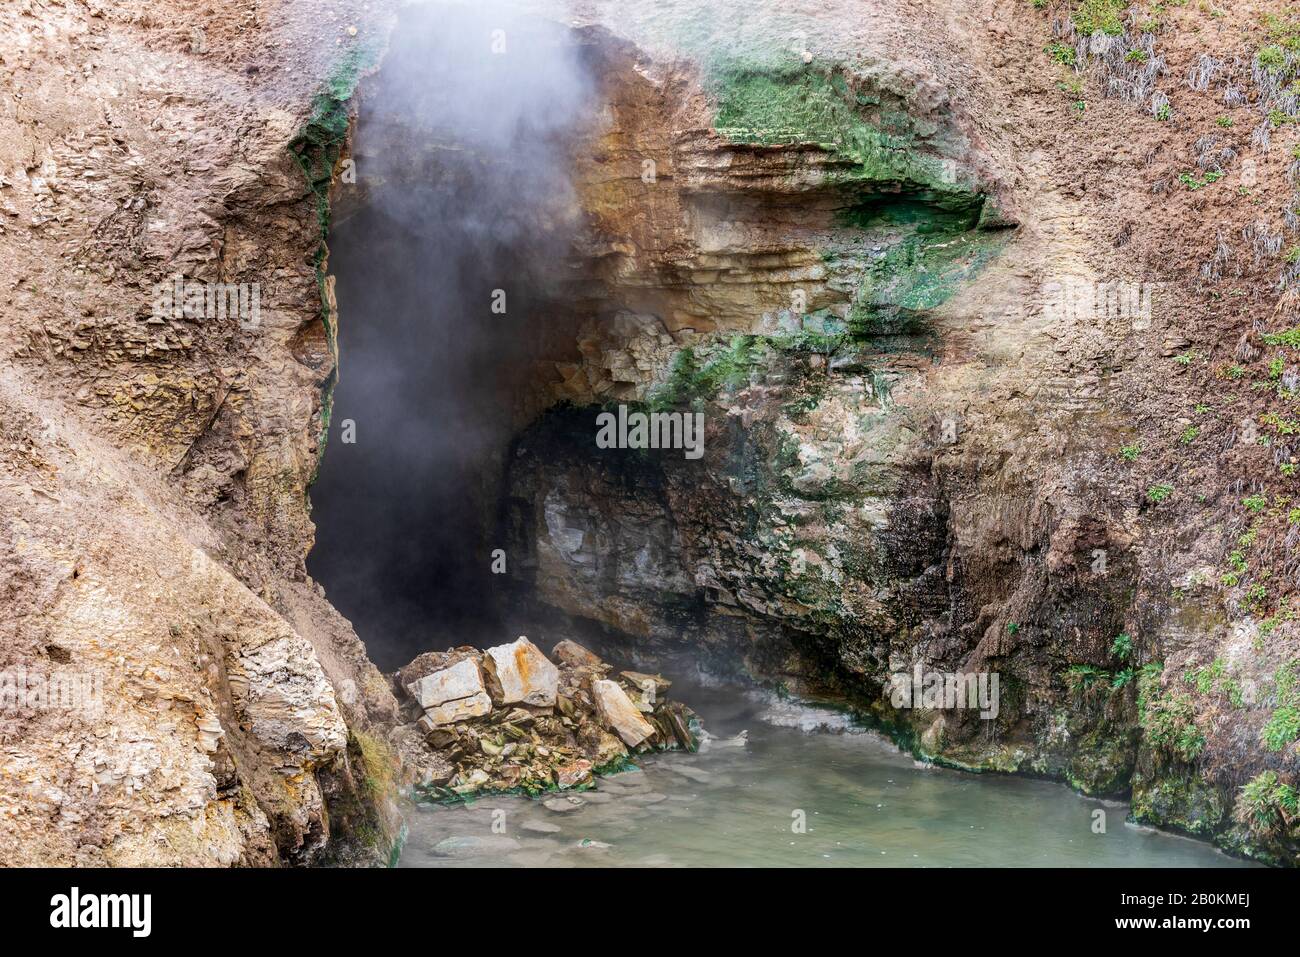 Cave entrance with steam and gas coming out. Hot spring at entrance to cave. Stock Photo